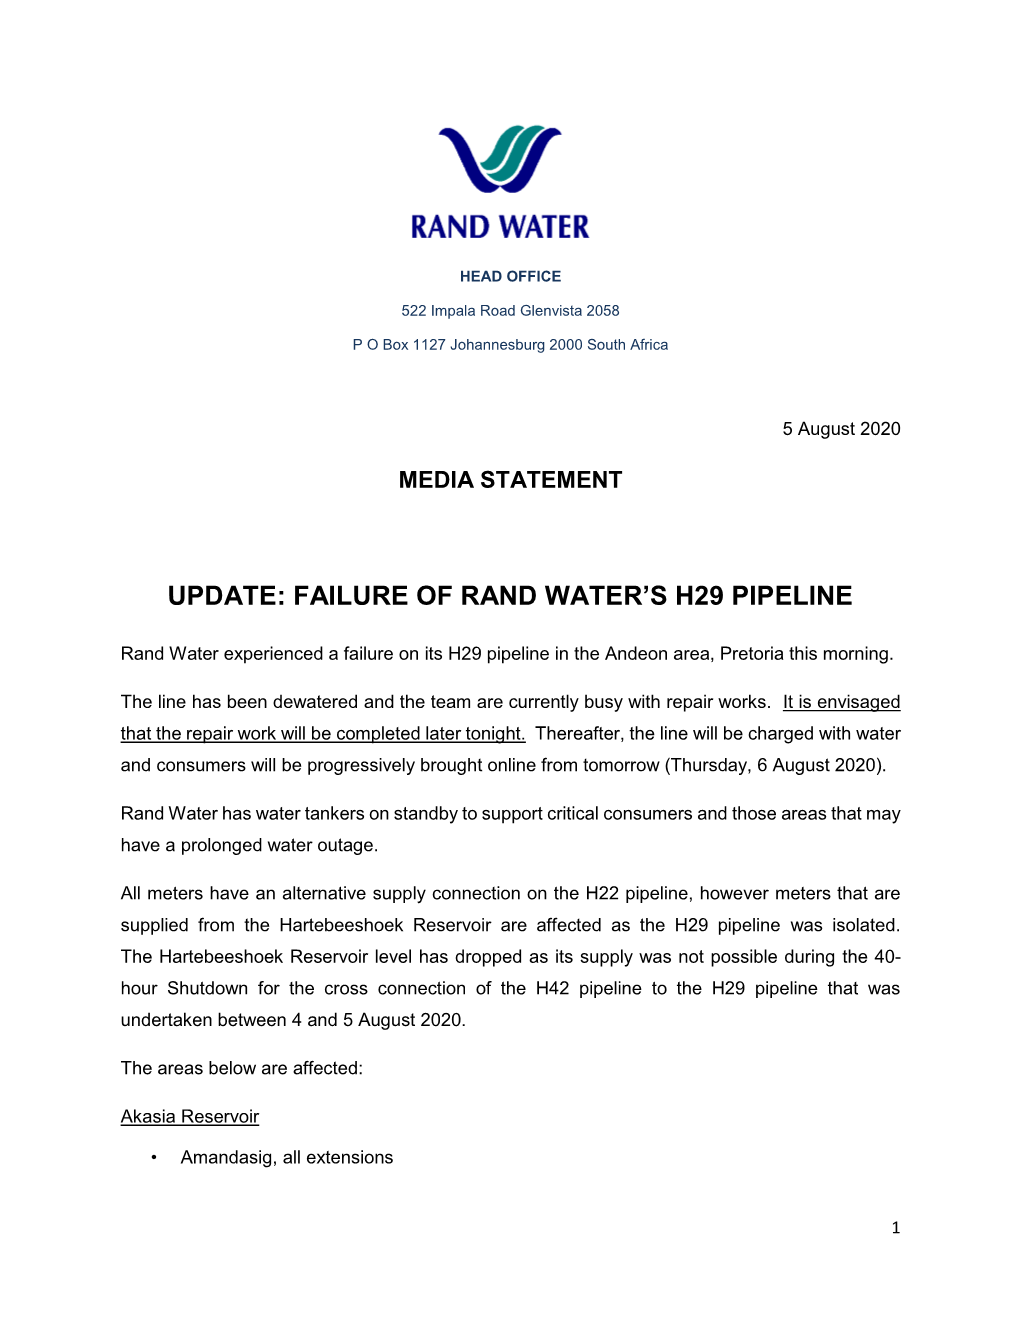 Update: Failure of Rand Water's H29 Pipeline